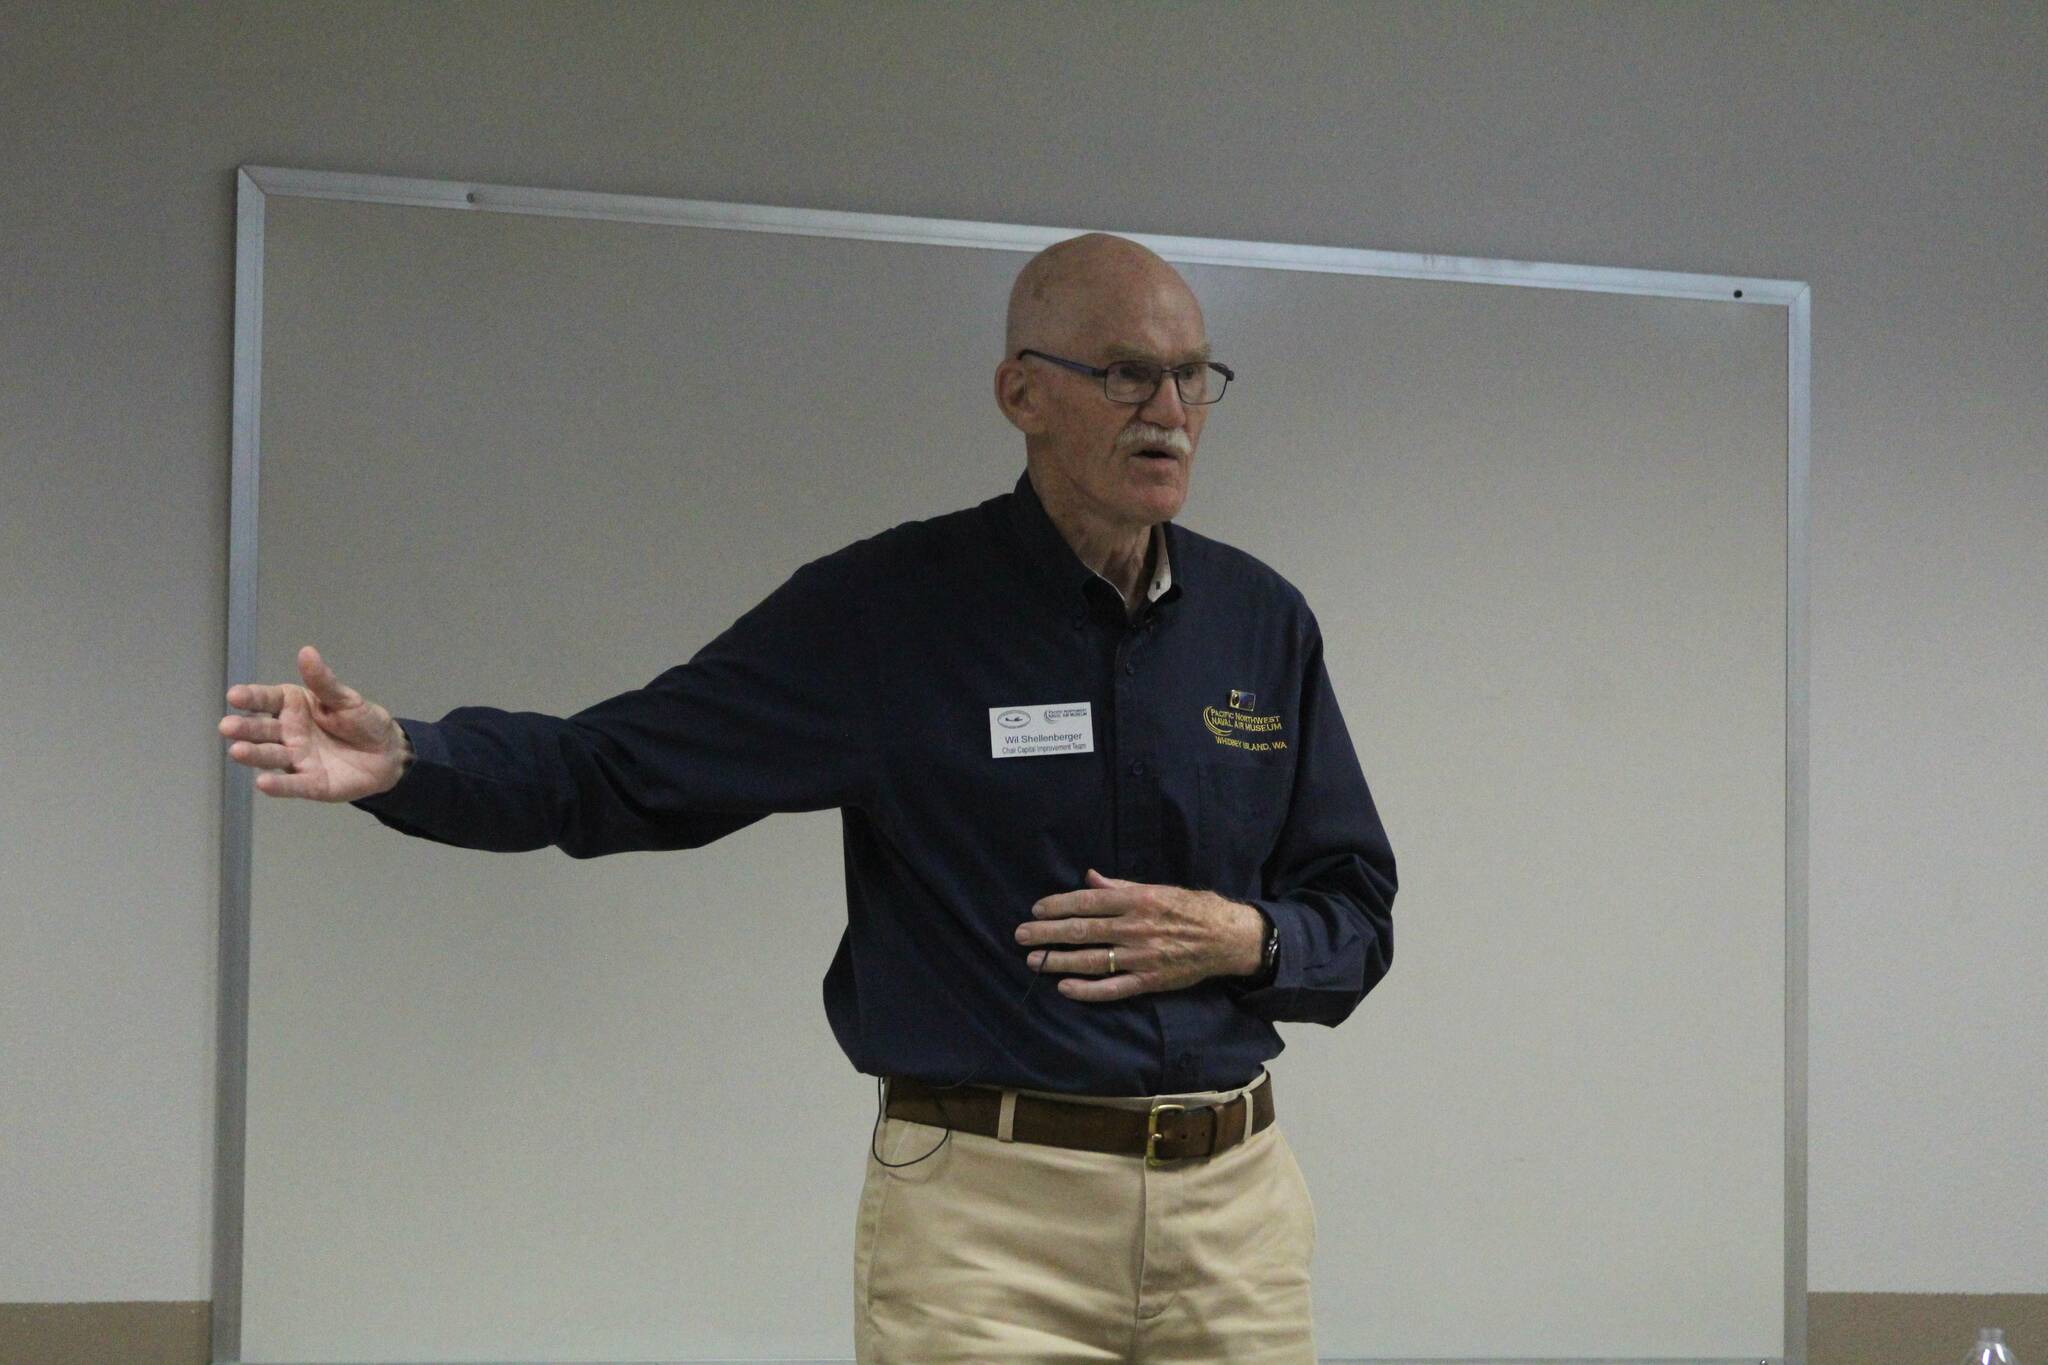 Wil Shellenberger delivers a presentation on the history of the Pacific Northwest Naval Air Museum at the Oak Harbor Library Aug. 17. (Photo by Karina Andrew/Whidbey News-Times)